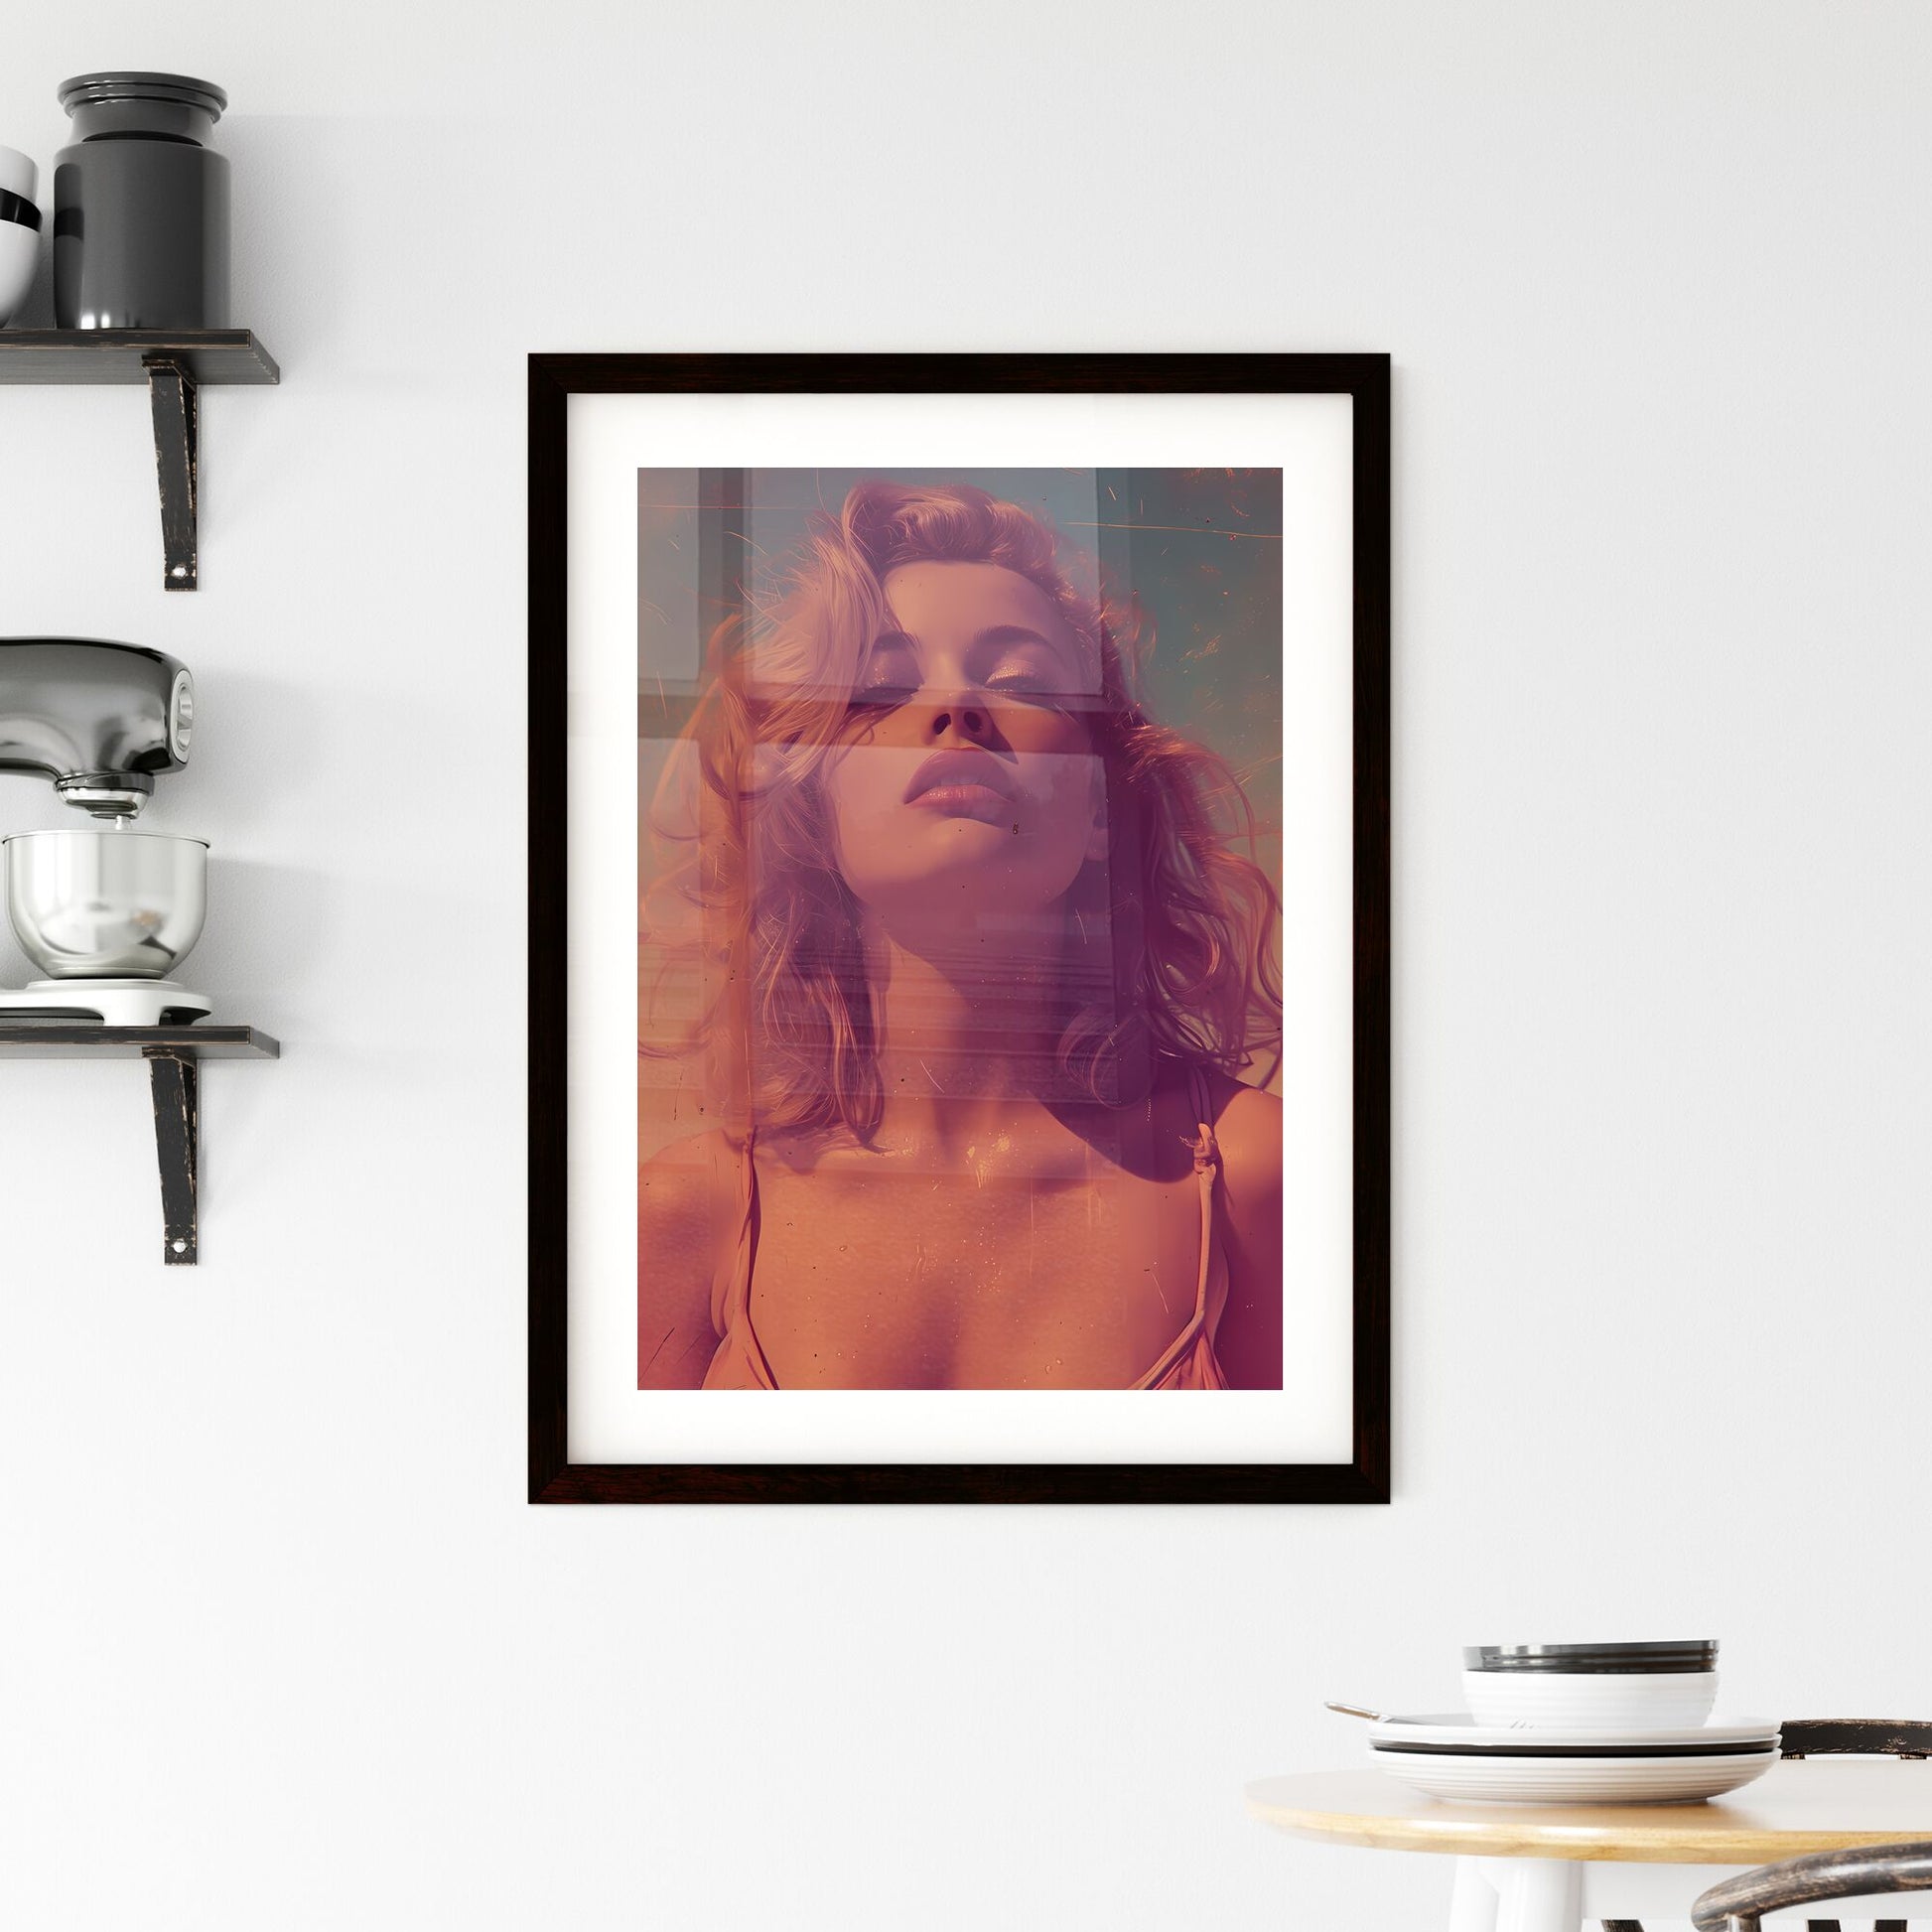 A striking half-body portrait of Marilyn Monroe - Art print of a woman with blonde hair and pink lips Default Title